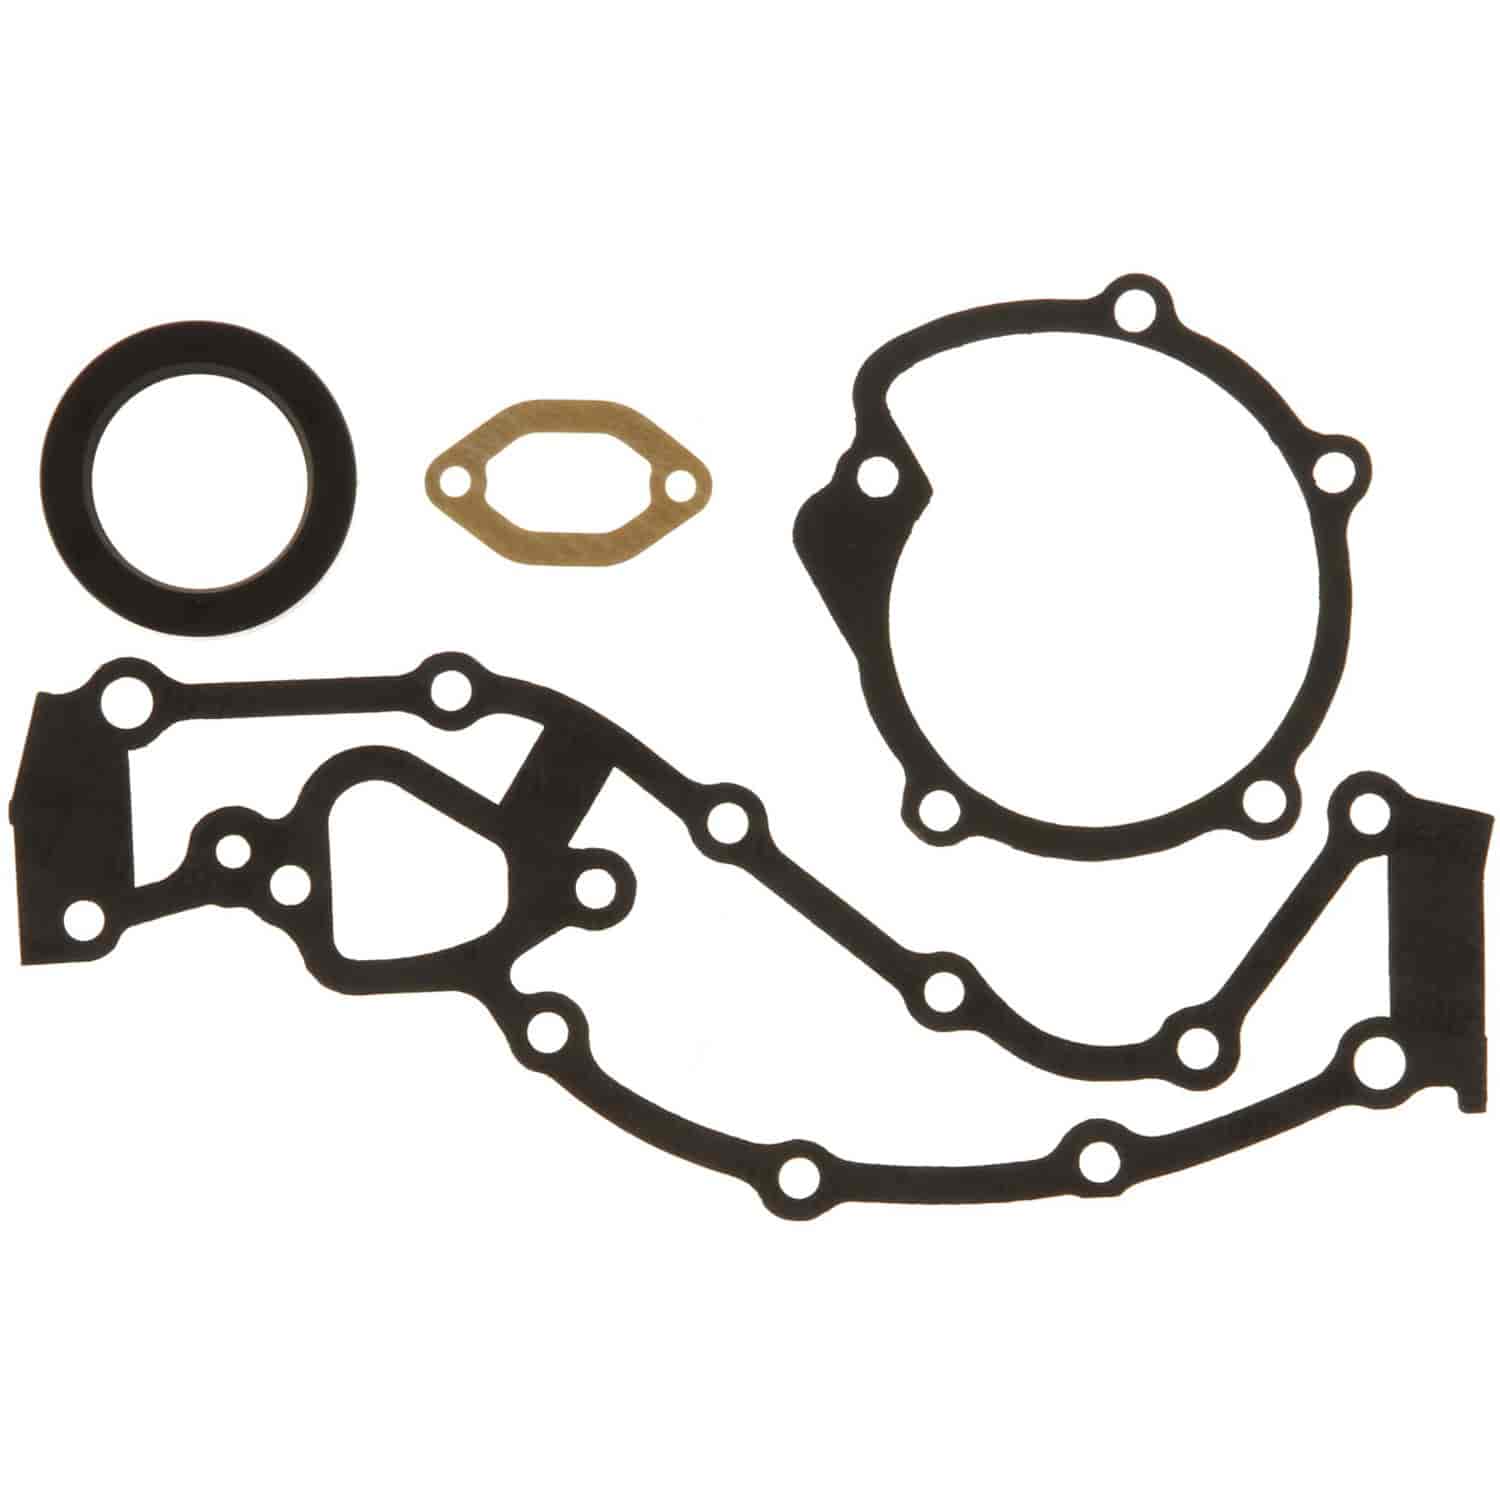 Timing Cover Set Chry Dod-Pass&Trk Mit-Pass&Trk Ply-Pass&Trk 122 2.0L 156 2.6L 76-89